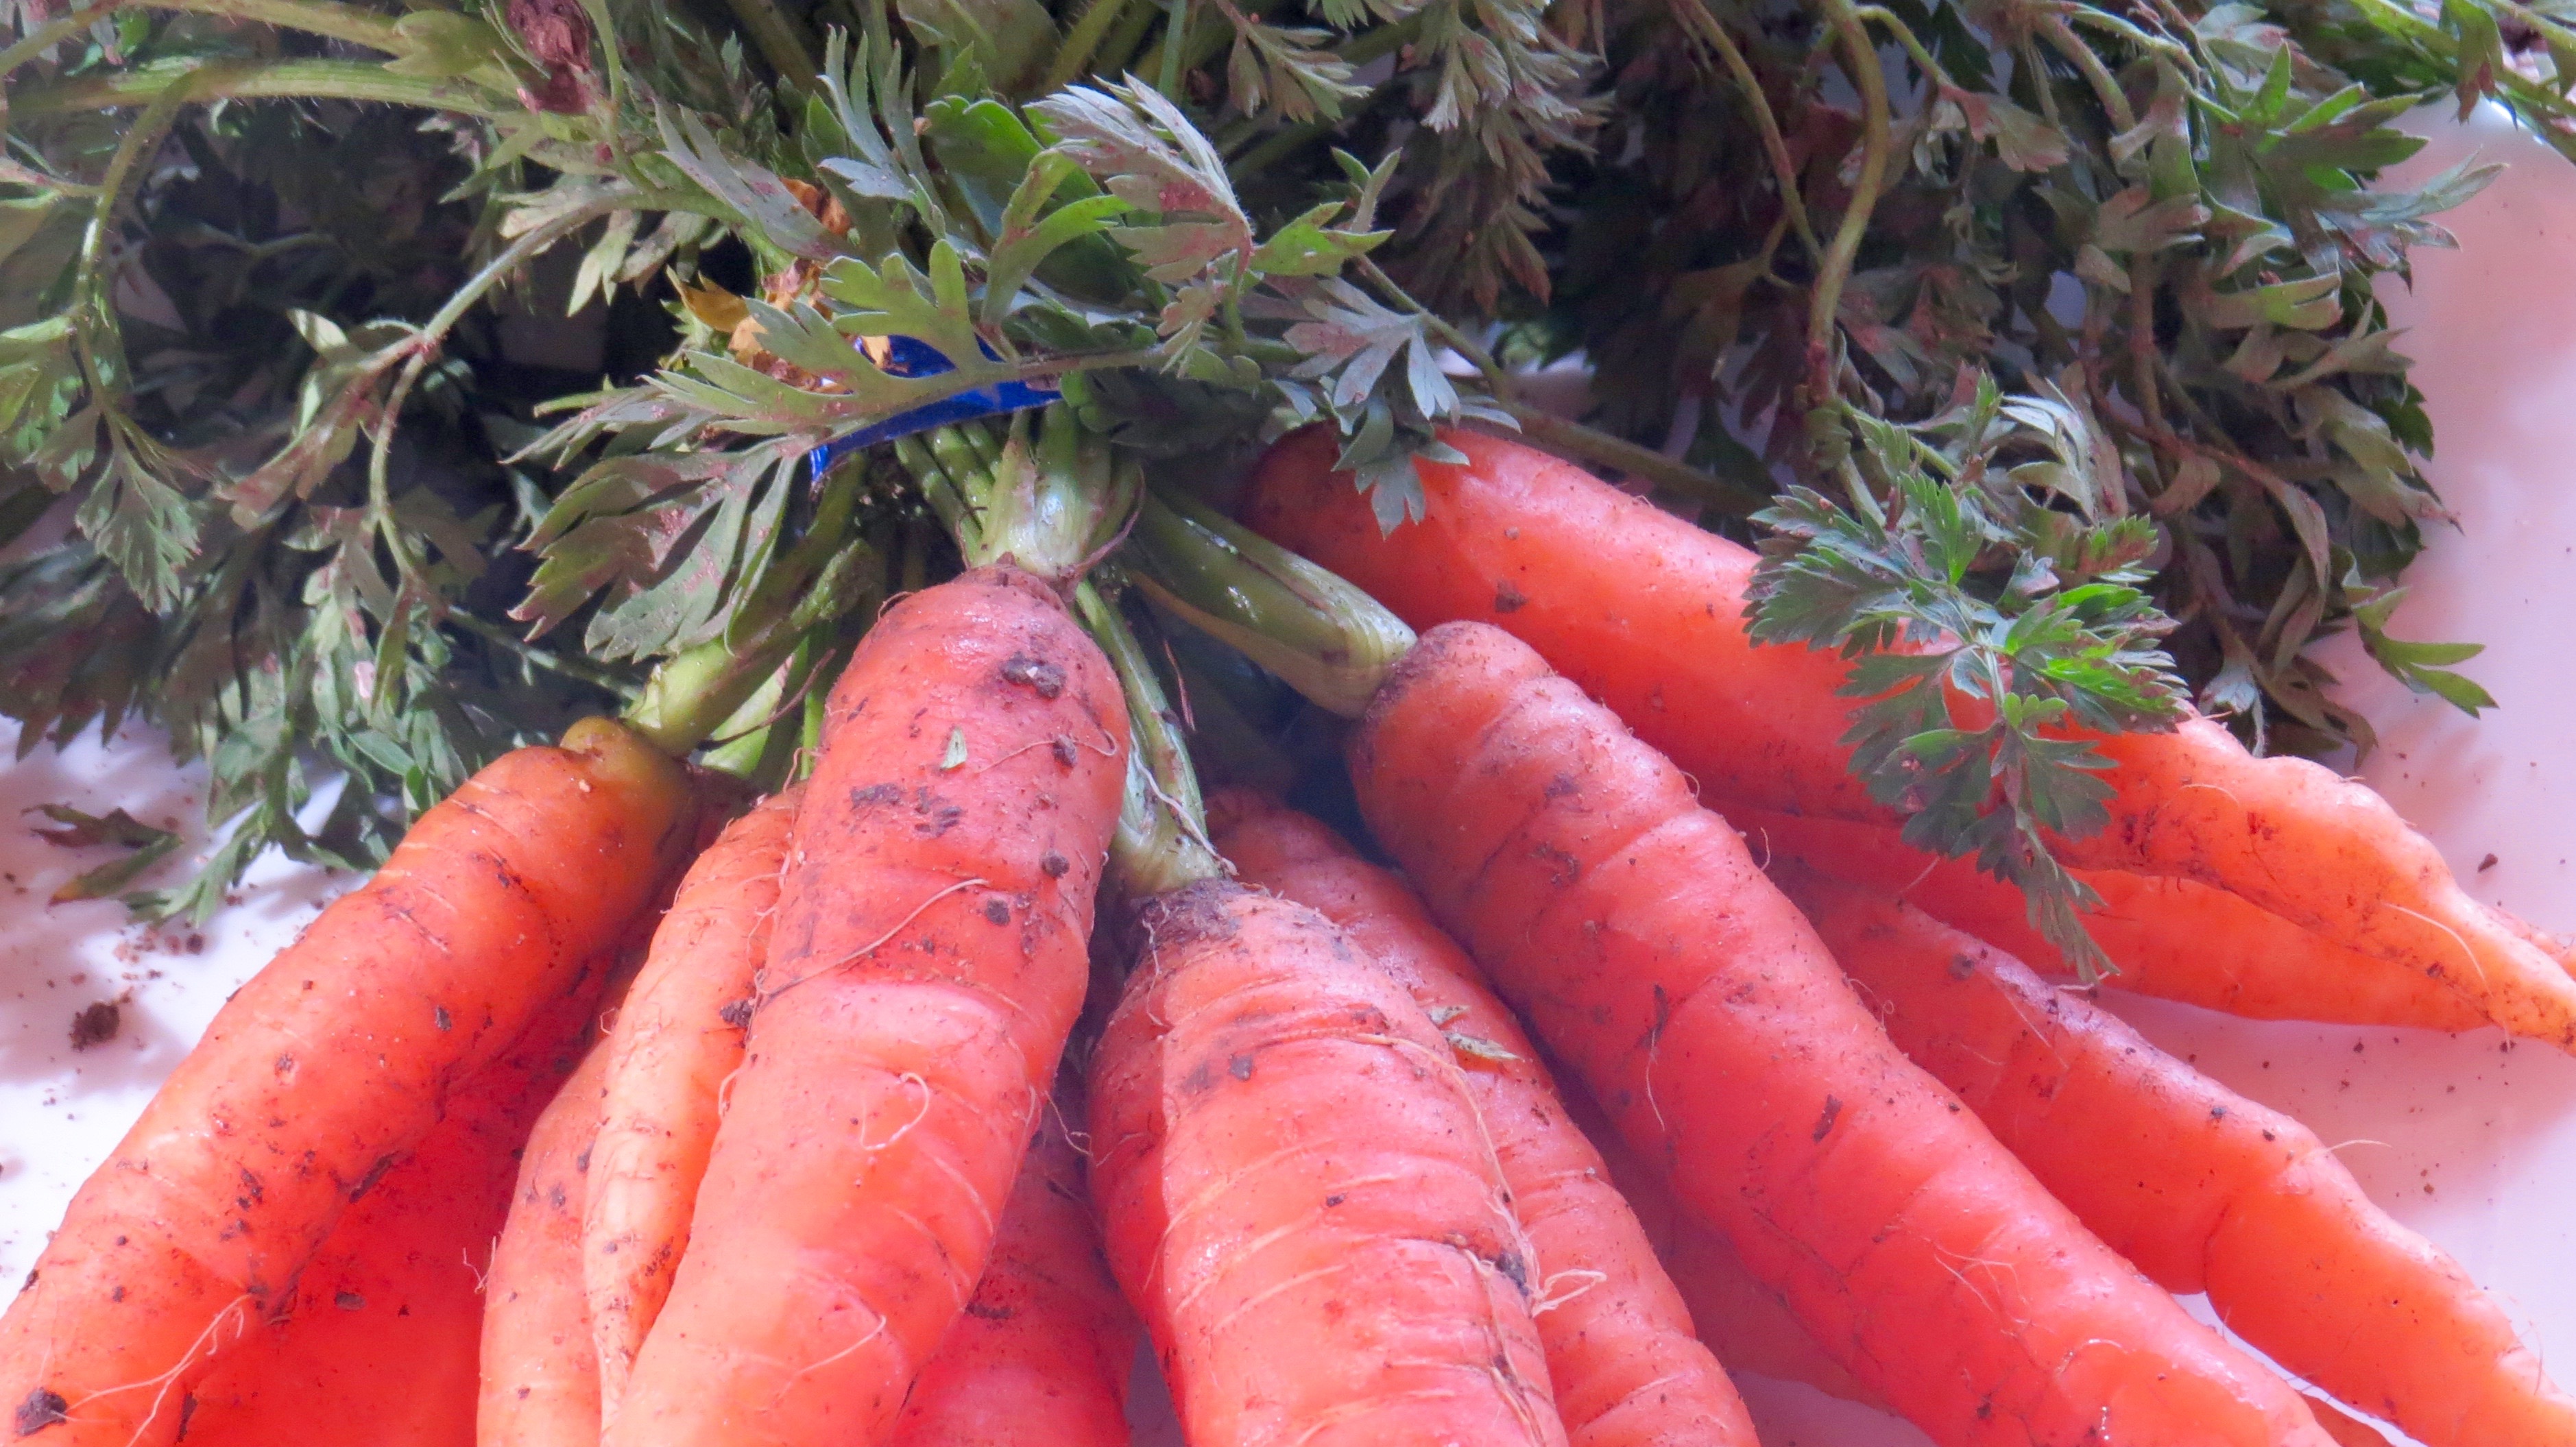 There something beautiful about fresh carrots just pulled from the earth.